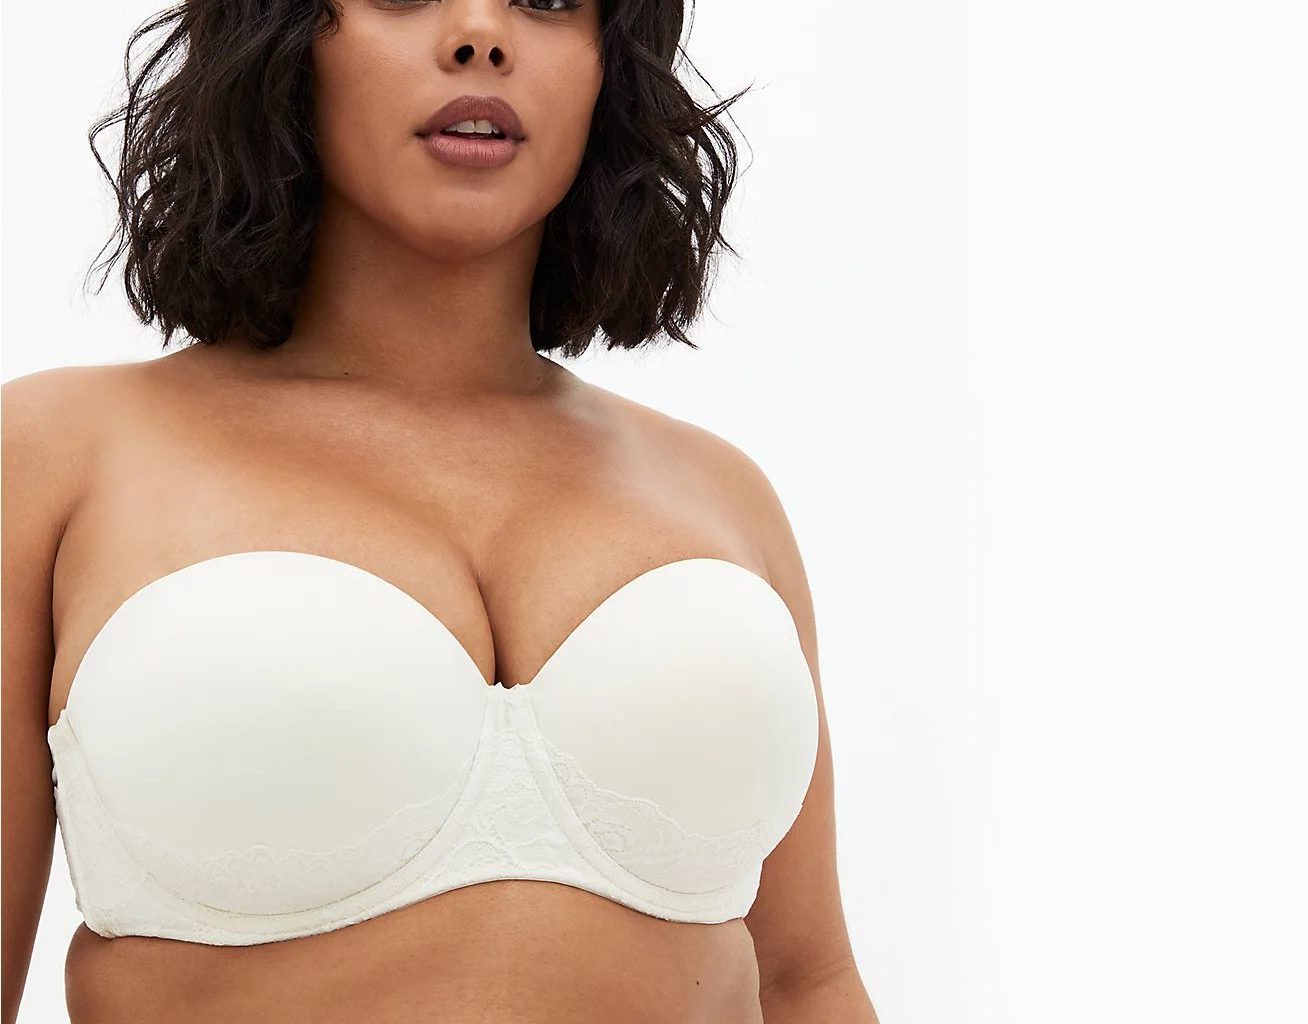 Tips For Getting the Best Backless Bra For Large Breasts